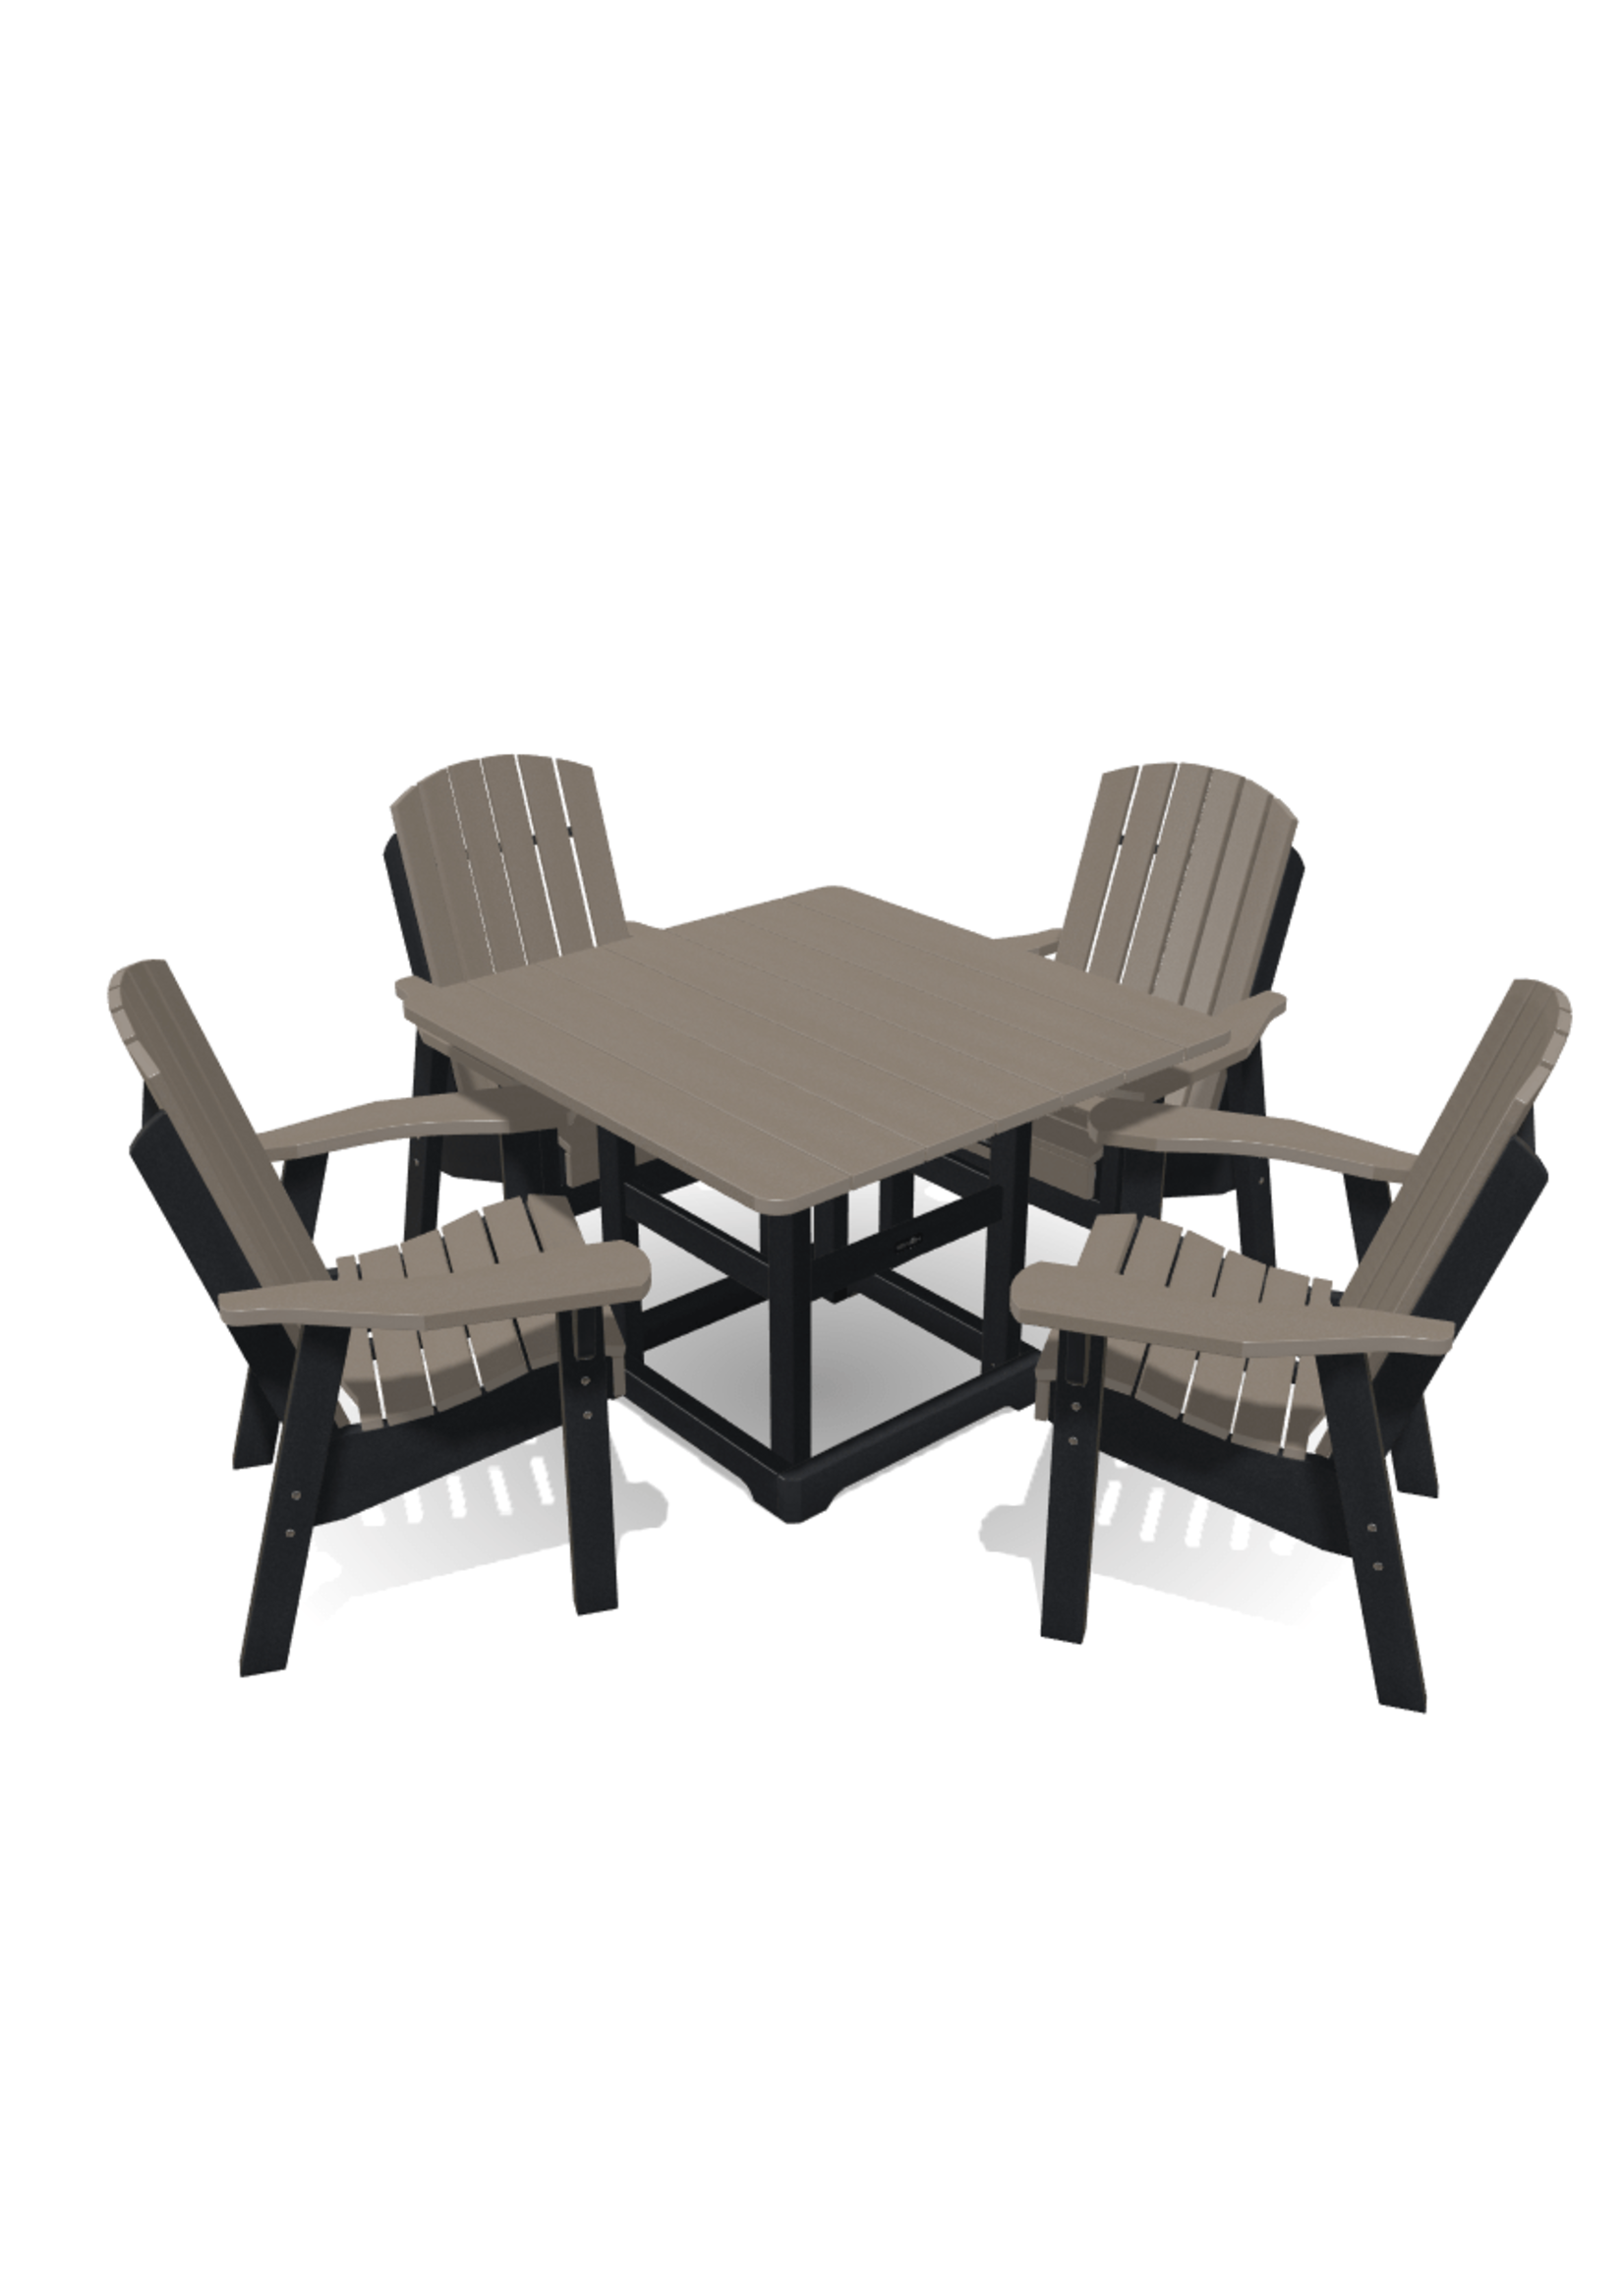 Krahn Set: Dining  40" Deluxe Table w/4 Chairs